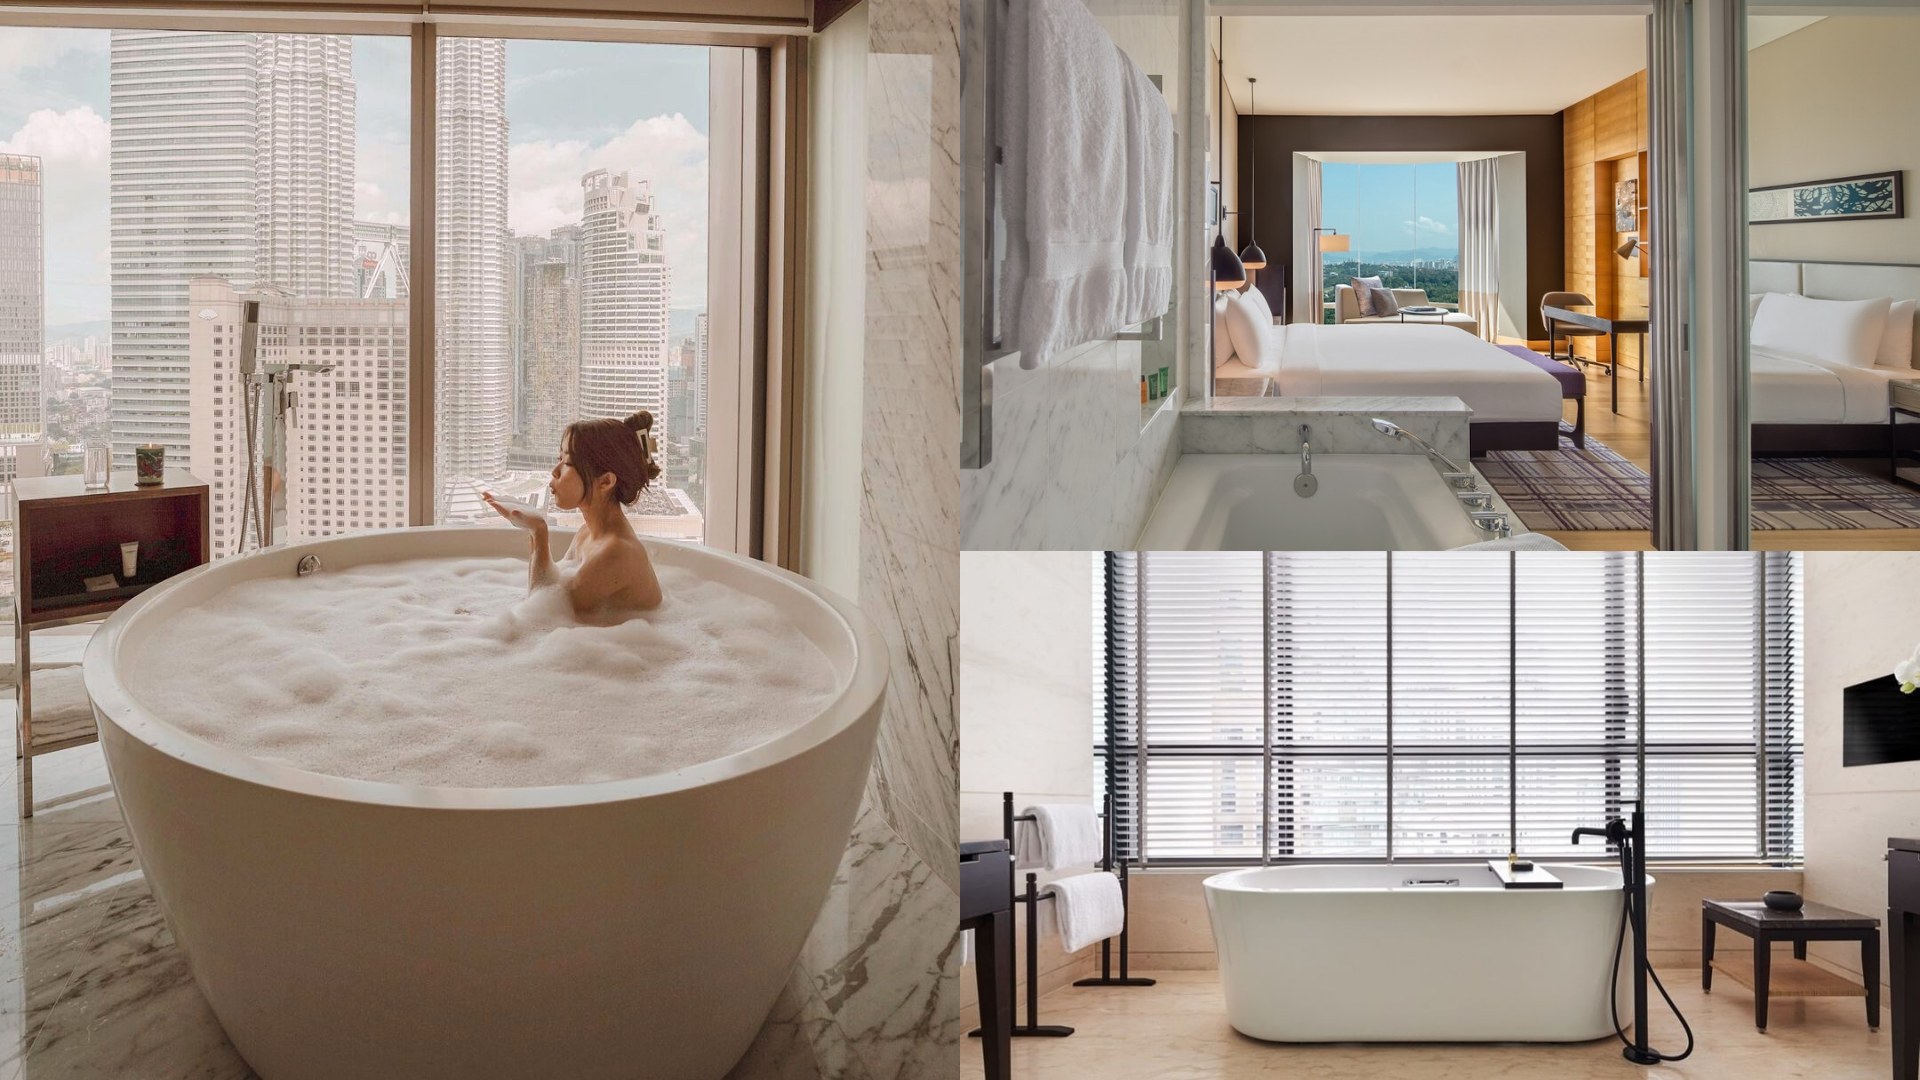 13 Best Hotels In Kl With Luxurious, Tea For Two Bathtub Review